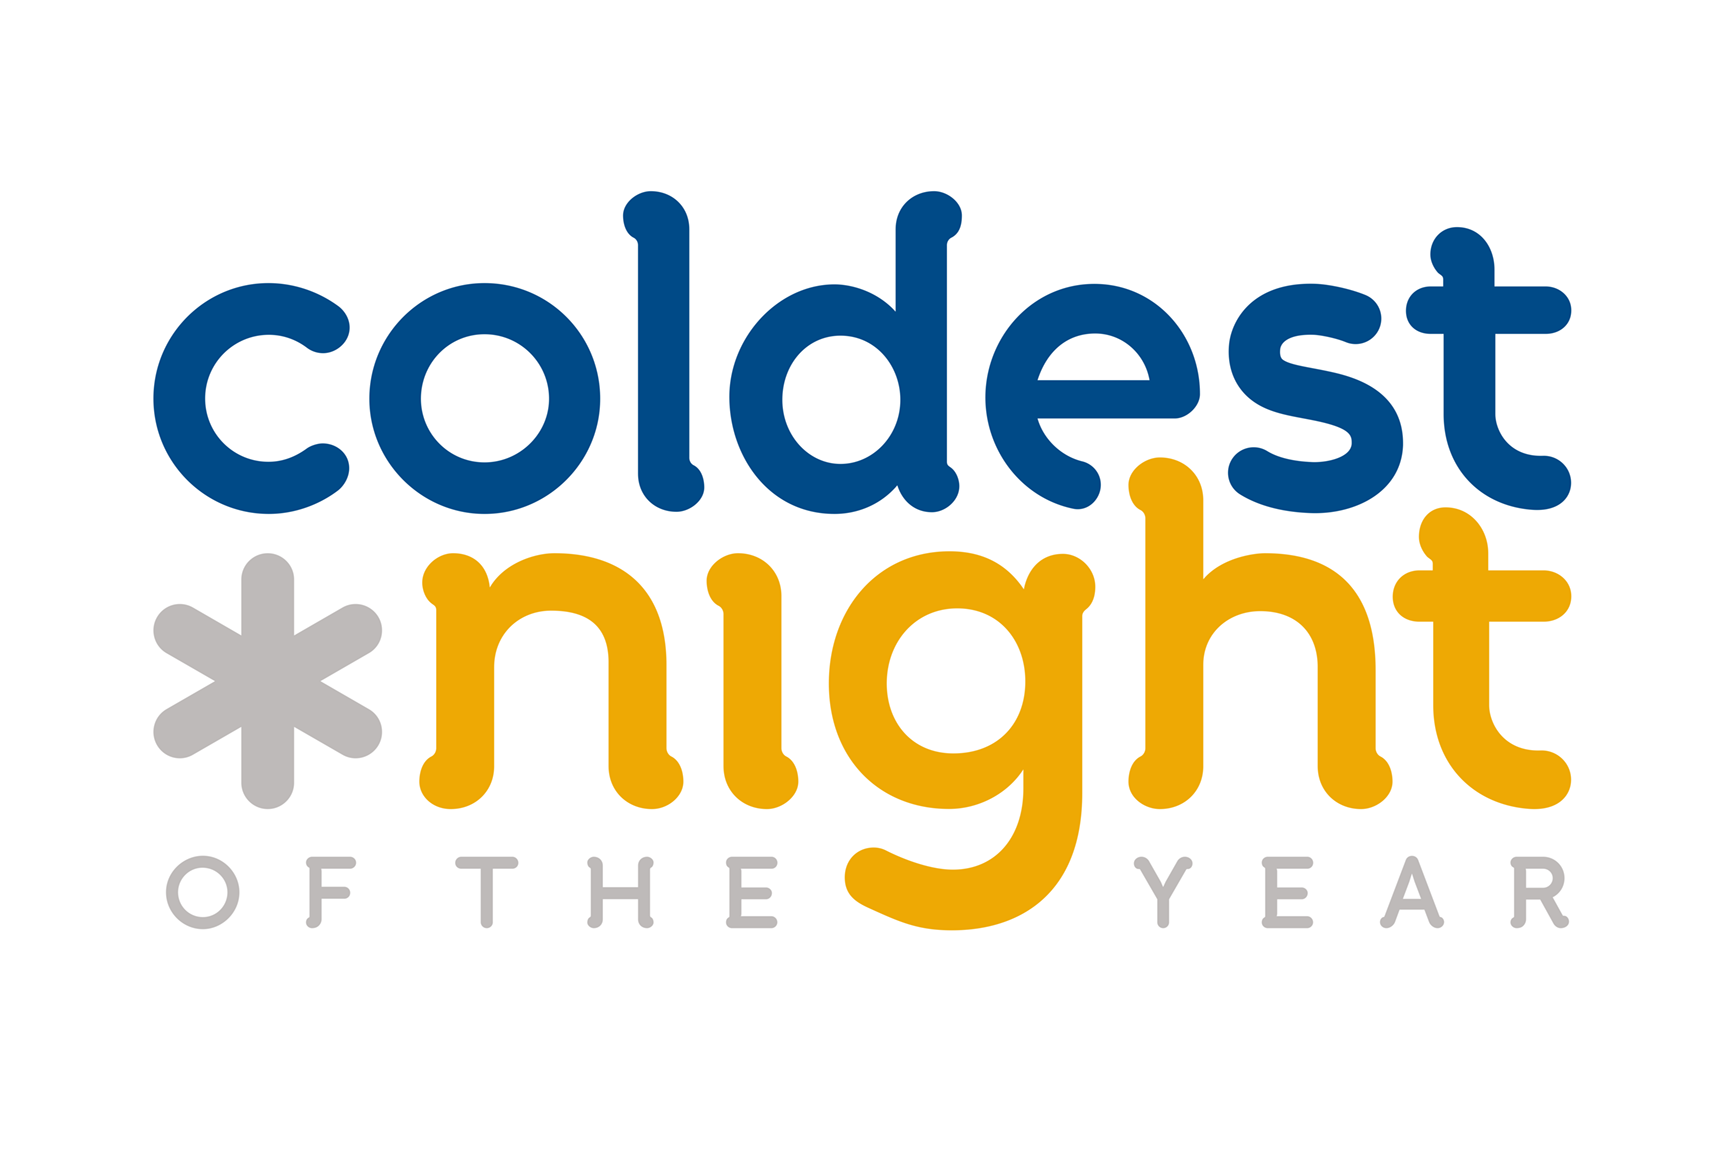 We Do Have Non-profits Supporting Those At Risk Of - Coldest Night Of The Year 2018 (1765x1212)